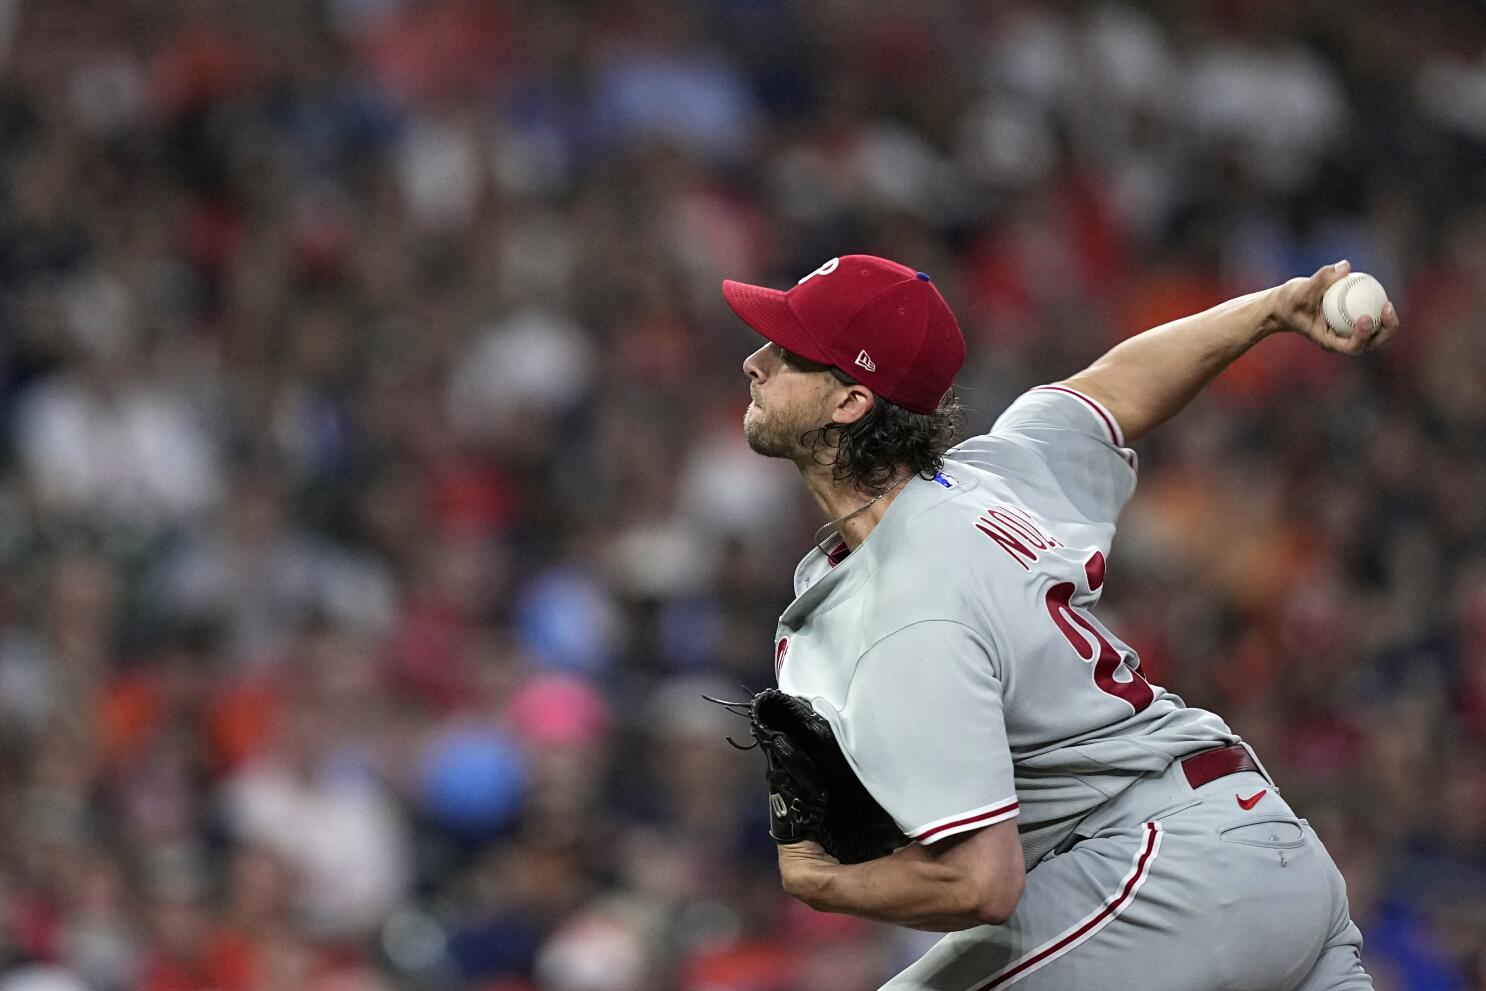 Phillies defeat Padres in NLCS, advance to the World Series - Los Angeles  Times